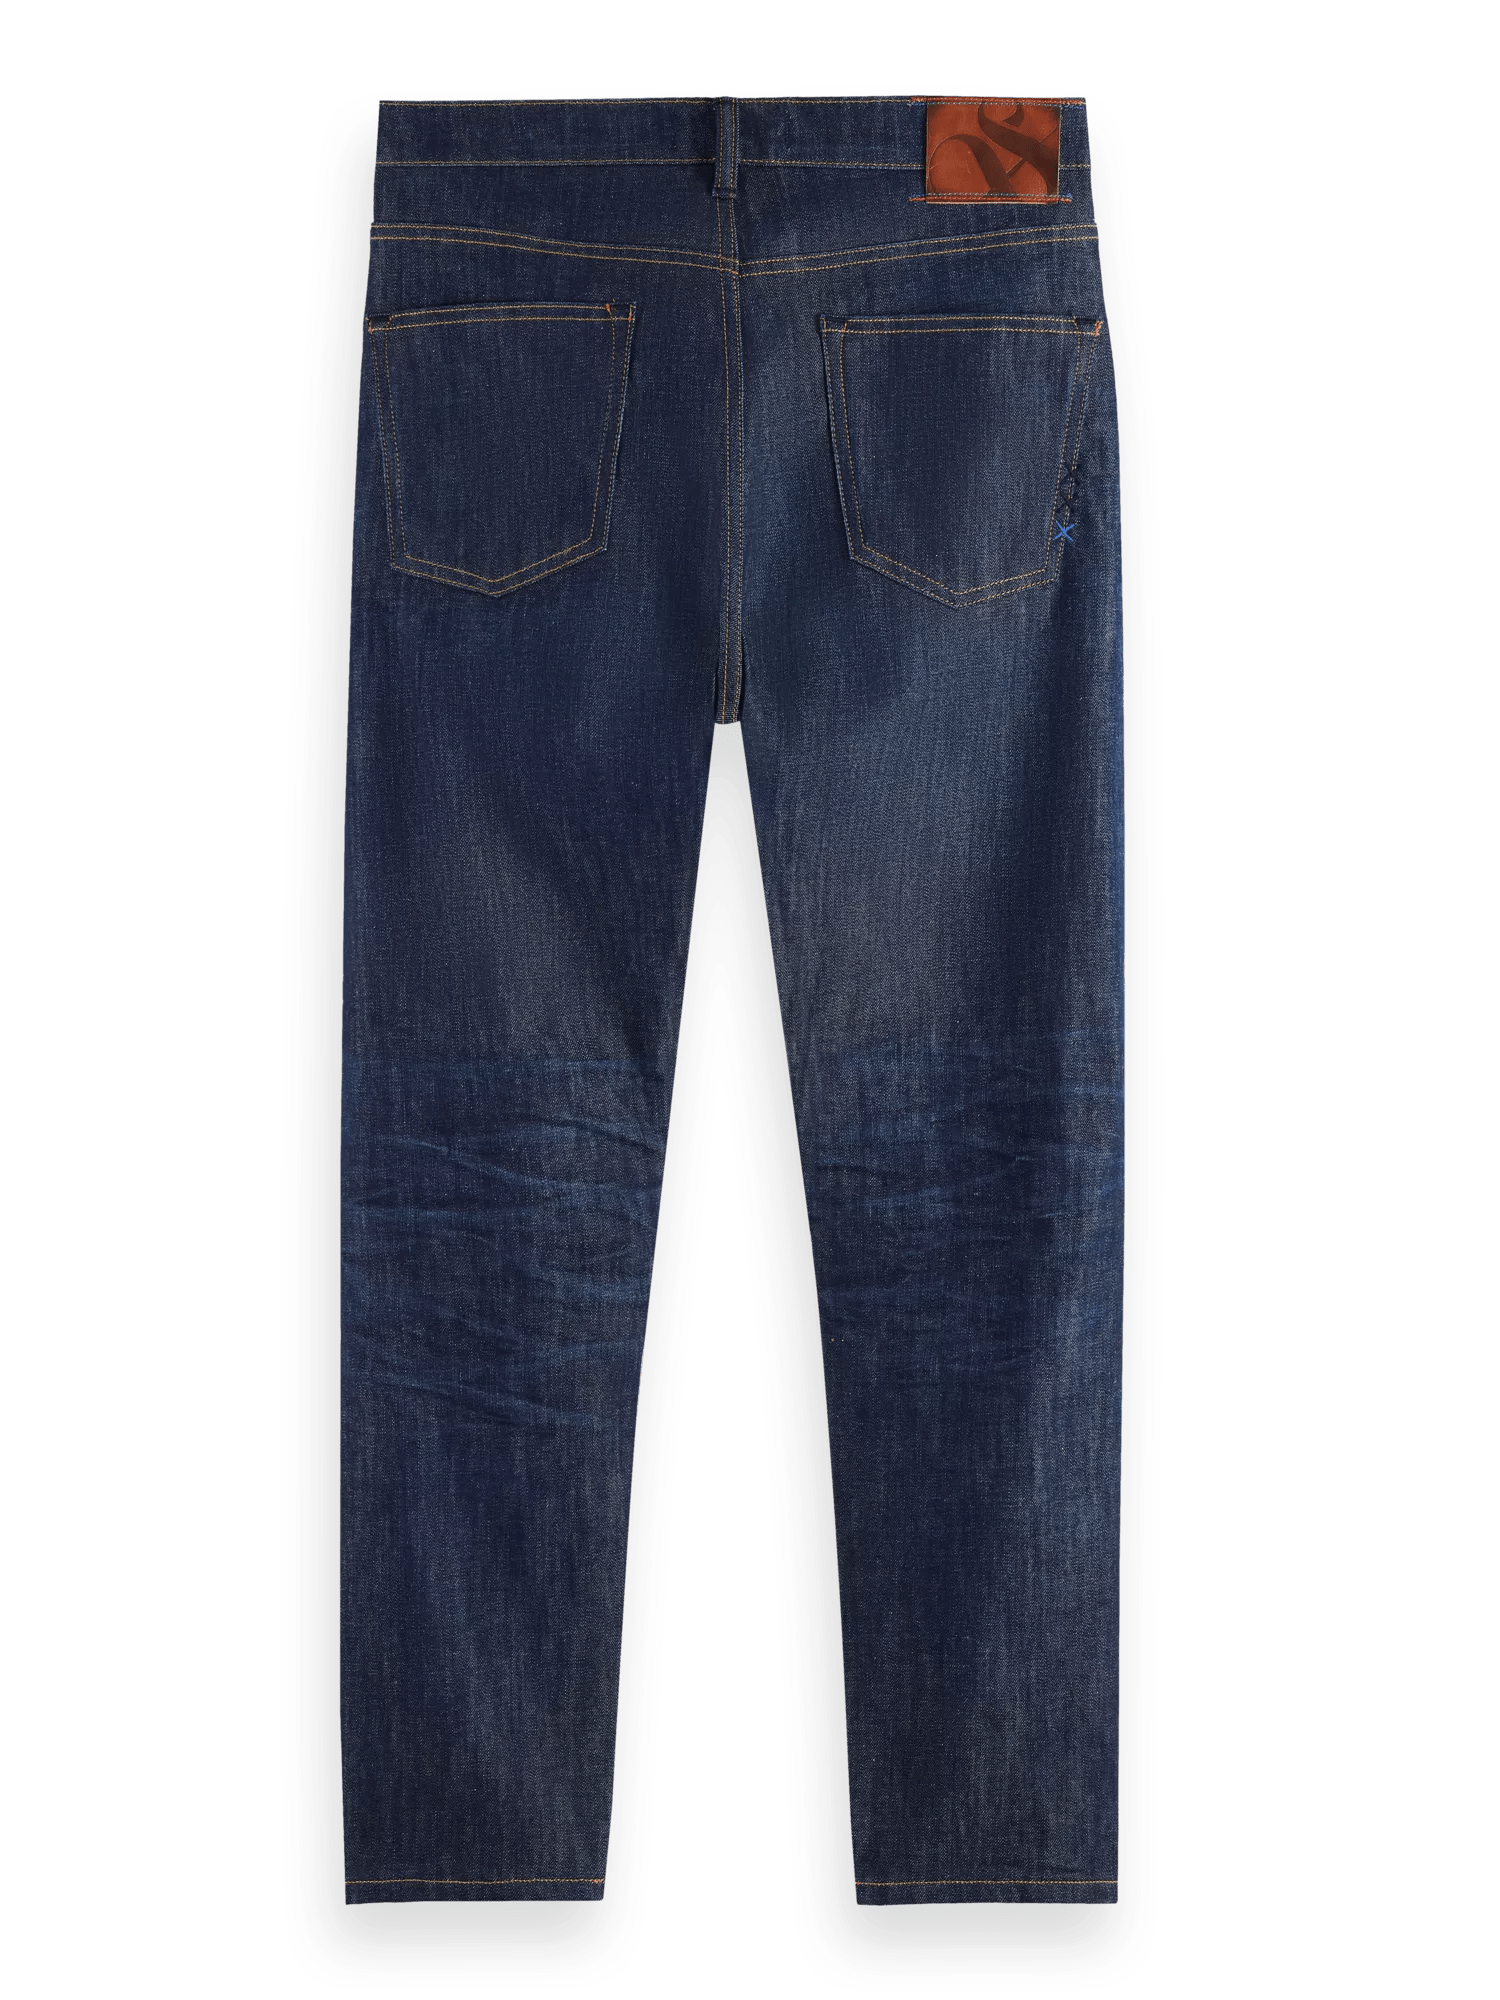 Scotch & Soda The Drop Regular Tapered Fit Jeans BCK